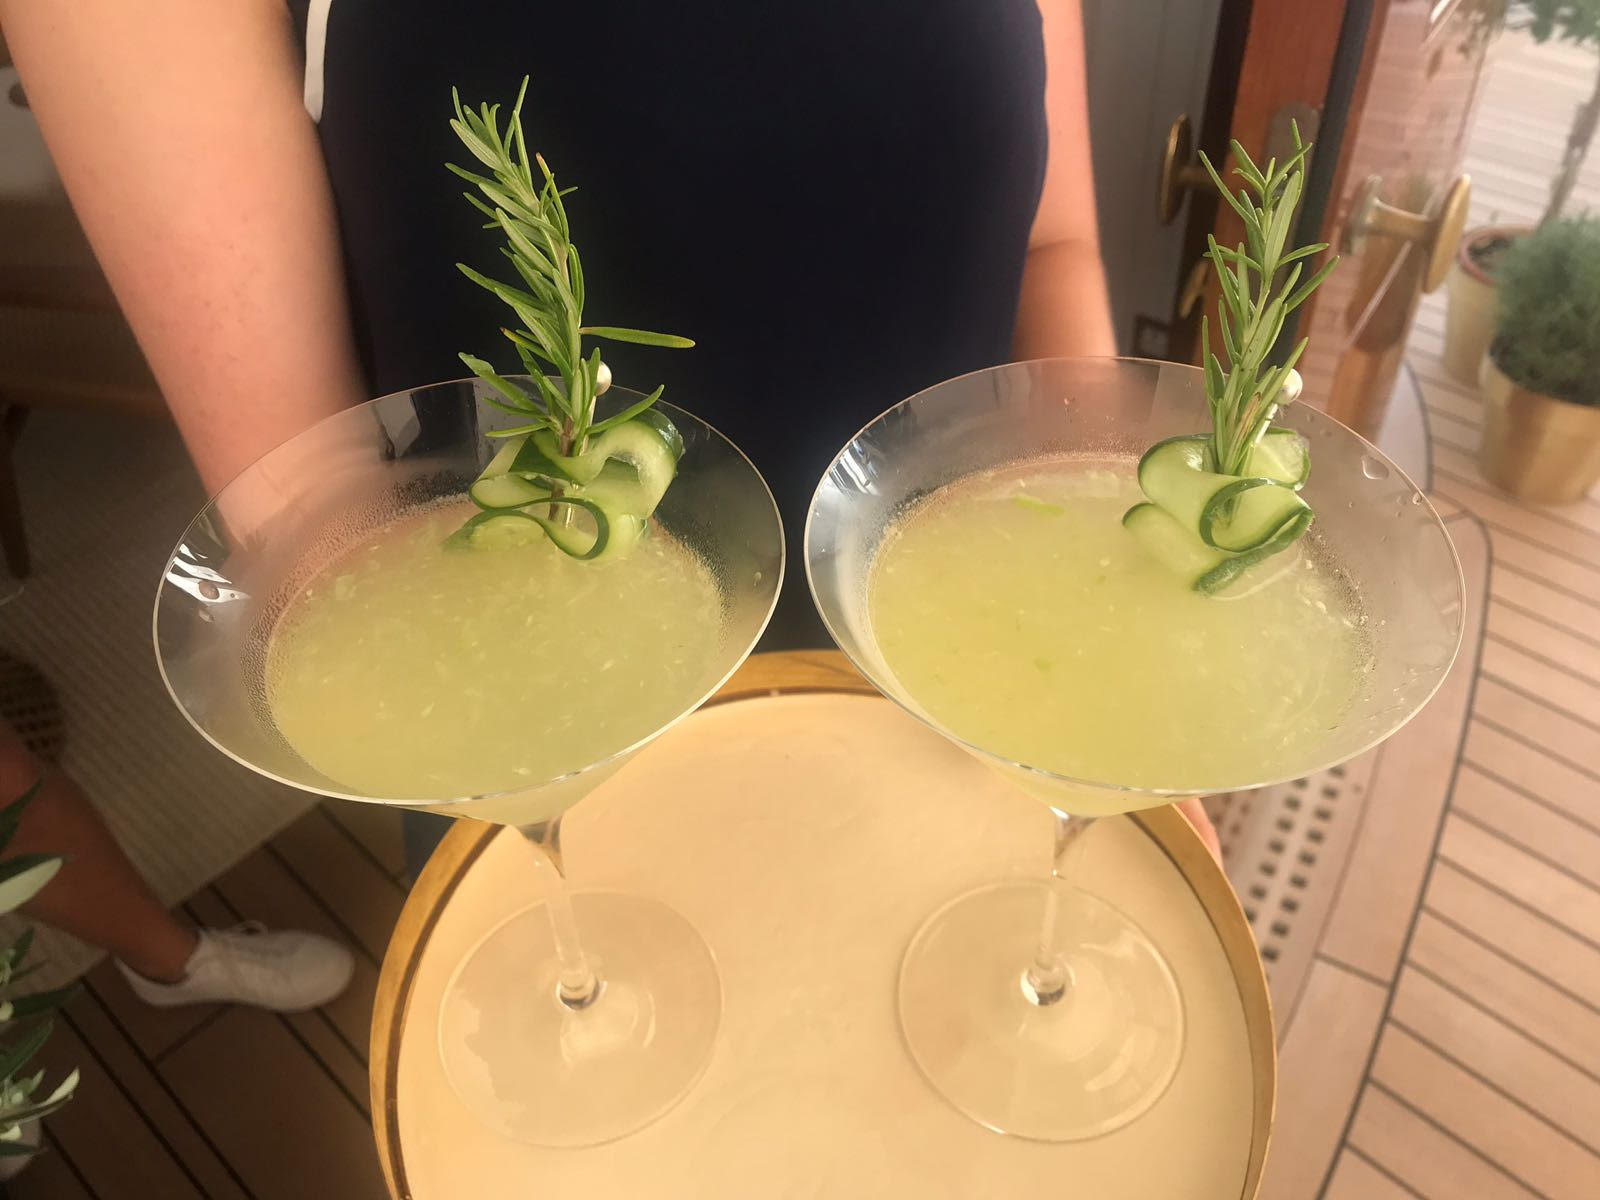 Superyacht cocktail recipes | The Cucumber Martini | Superyacht Content